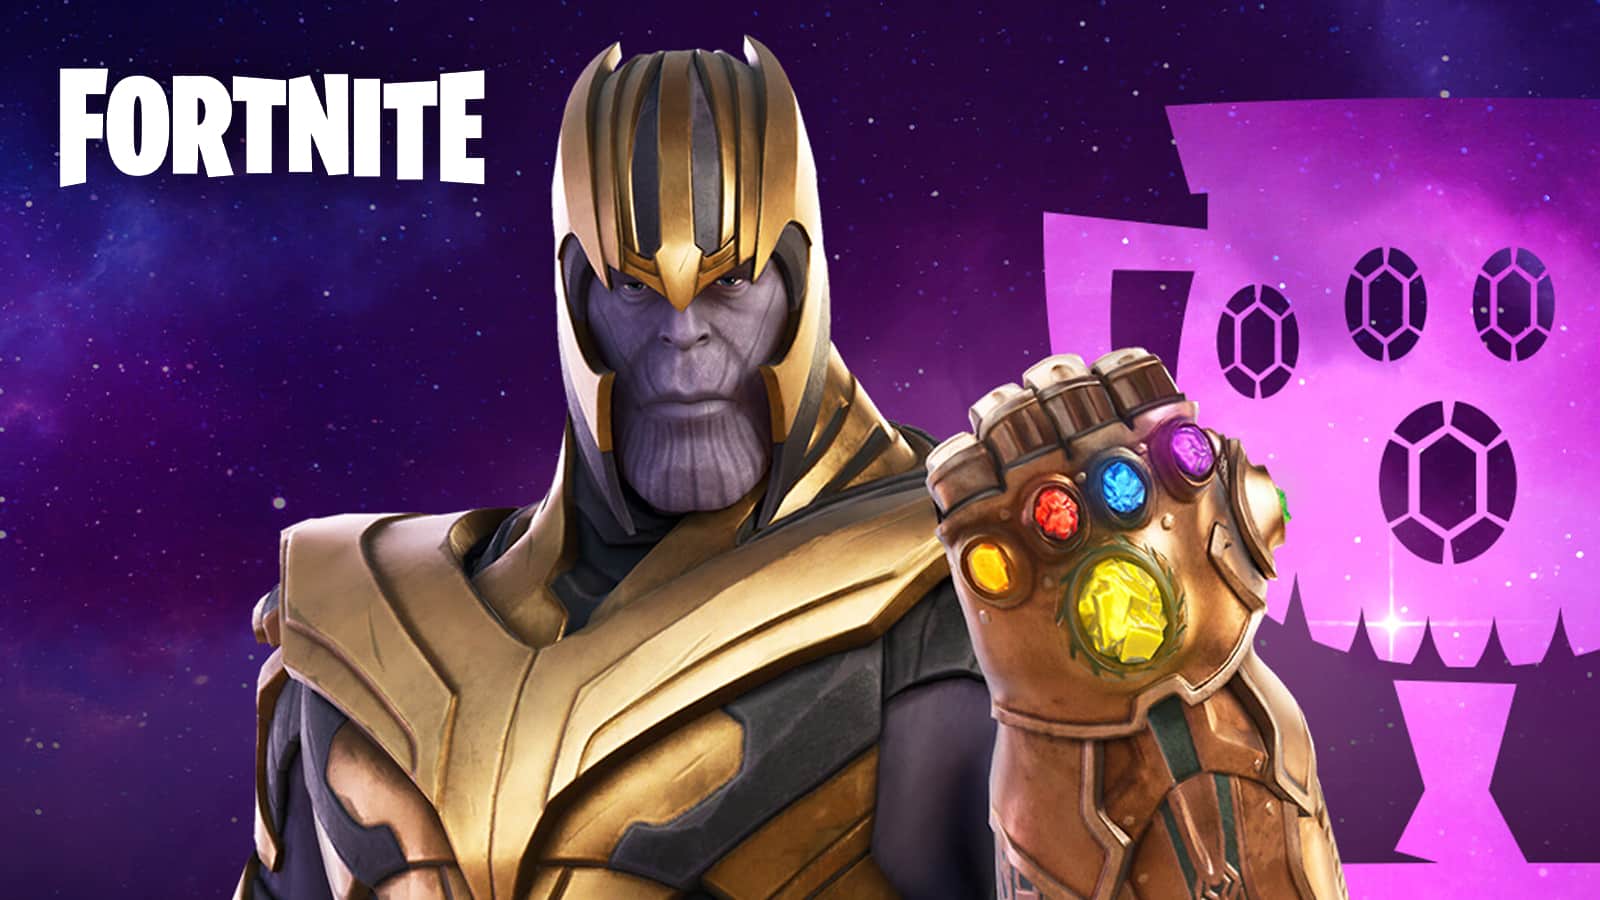 How to get Fortnite Thanos skin in Season 7: Thanos Cup details revealed